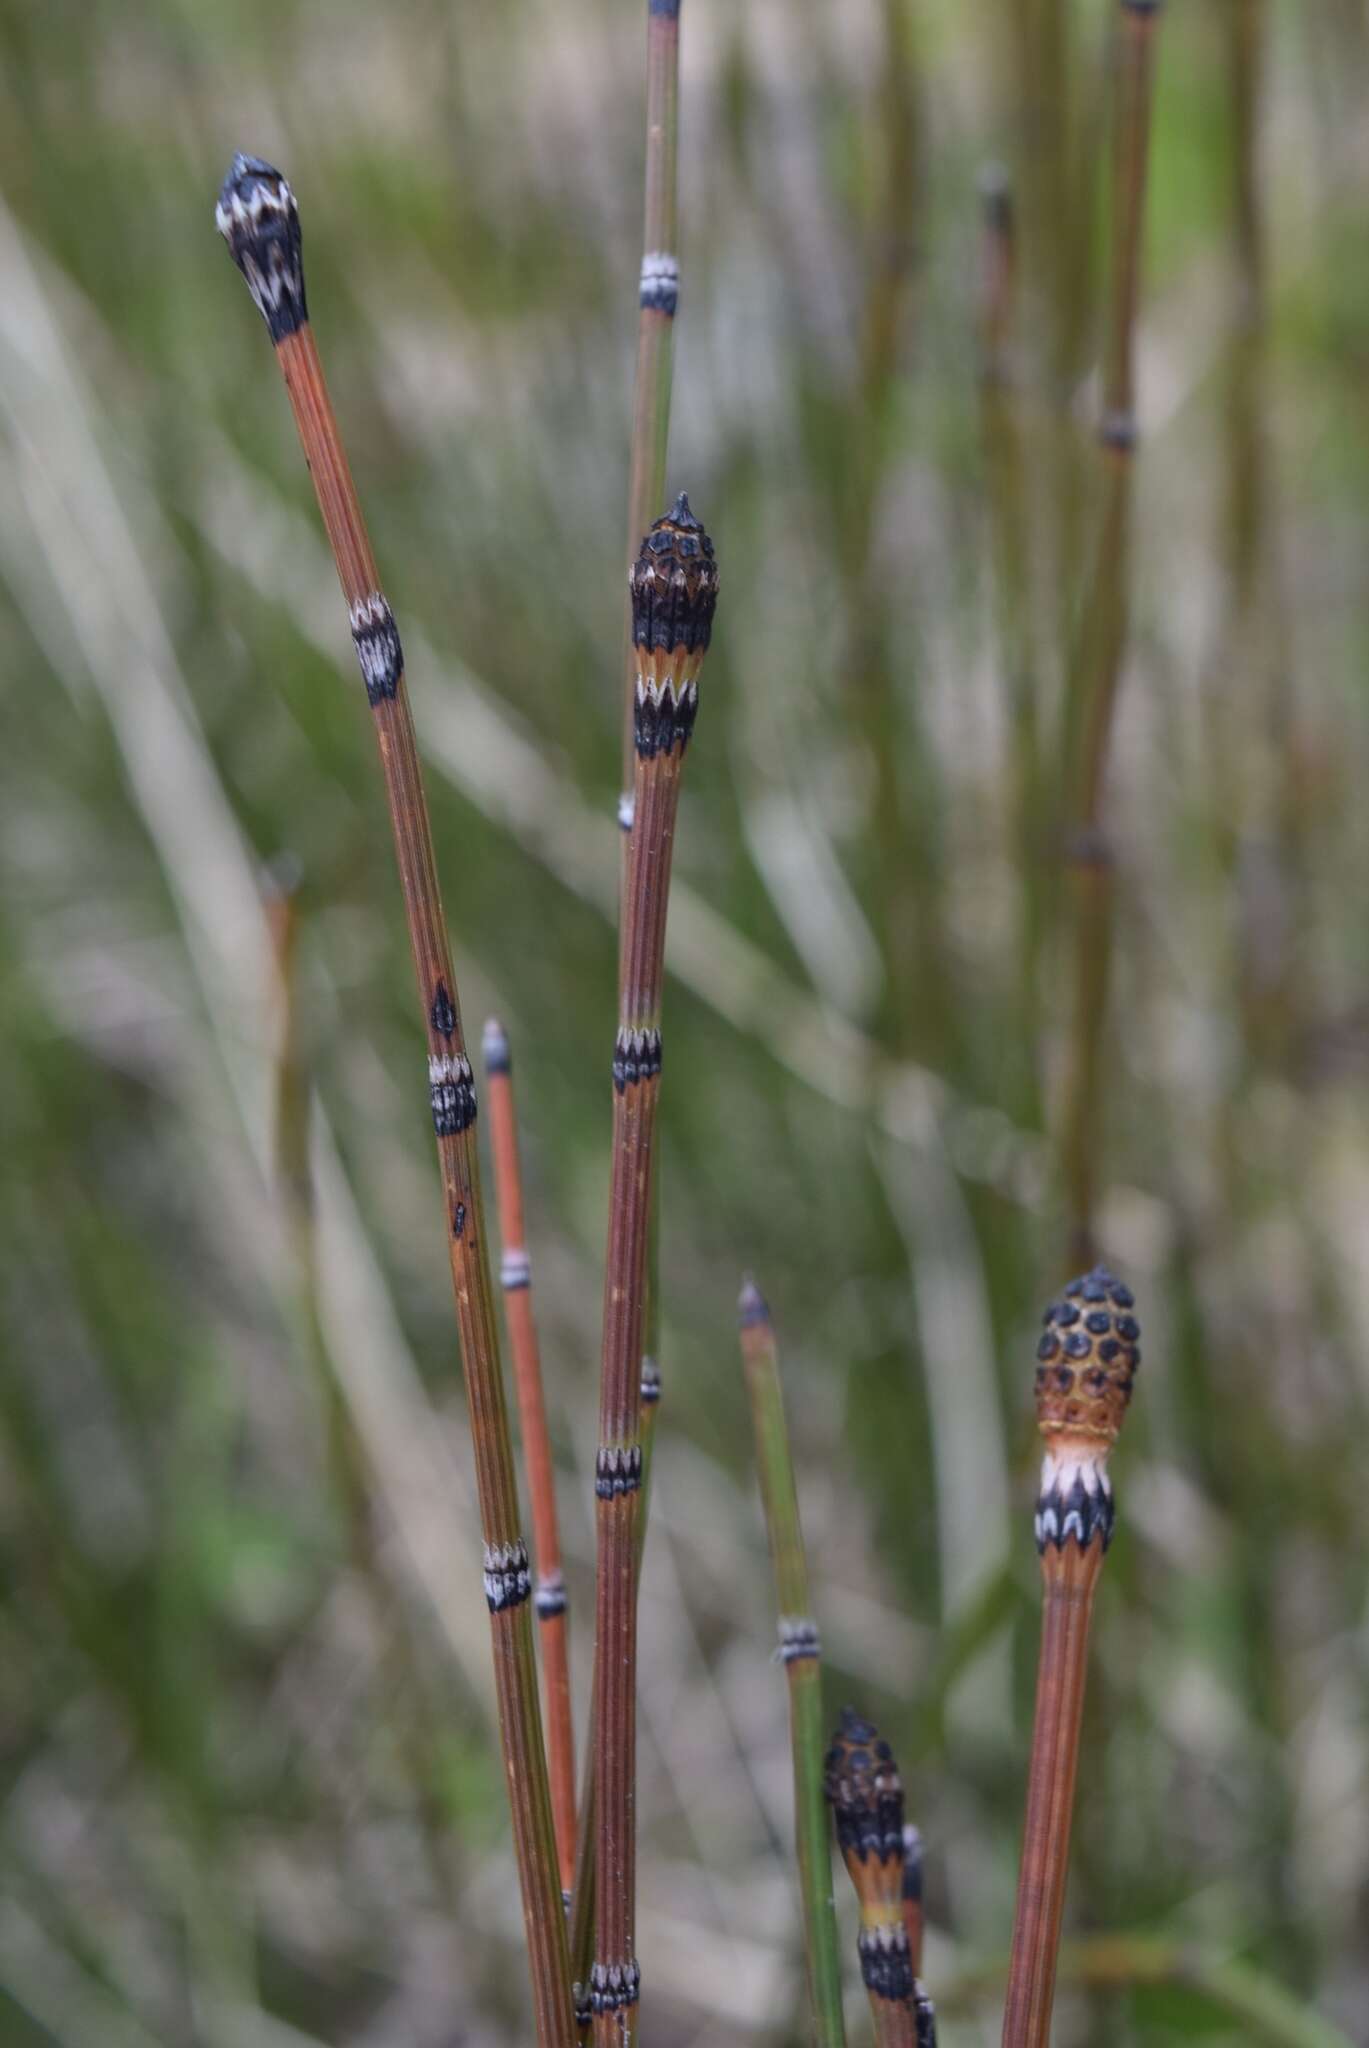 Image of variegated horsetail